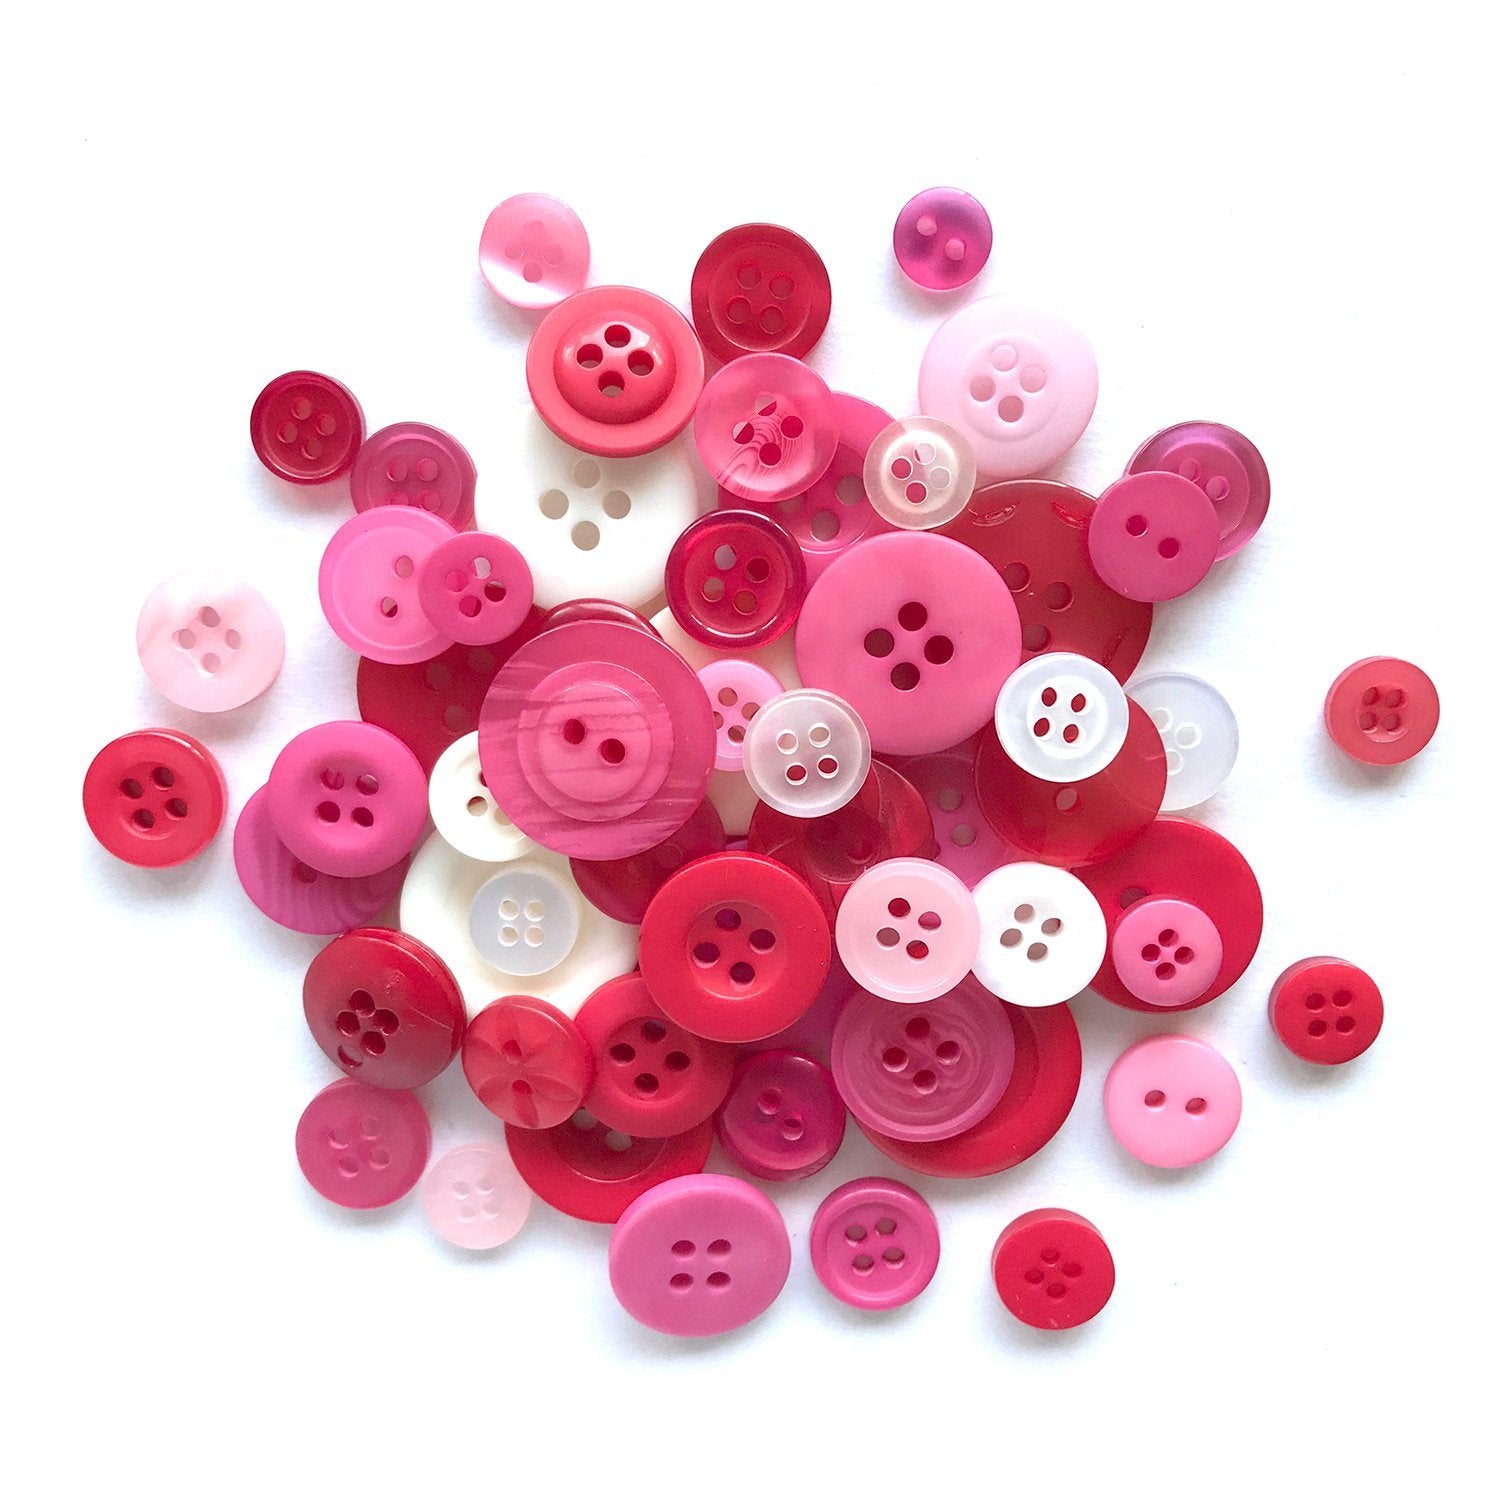 Sweetheart - BCB155 - Buttons Galore and More